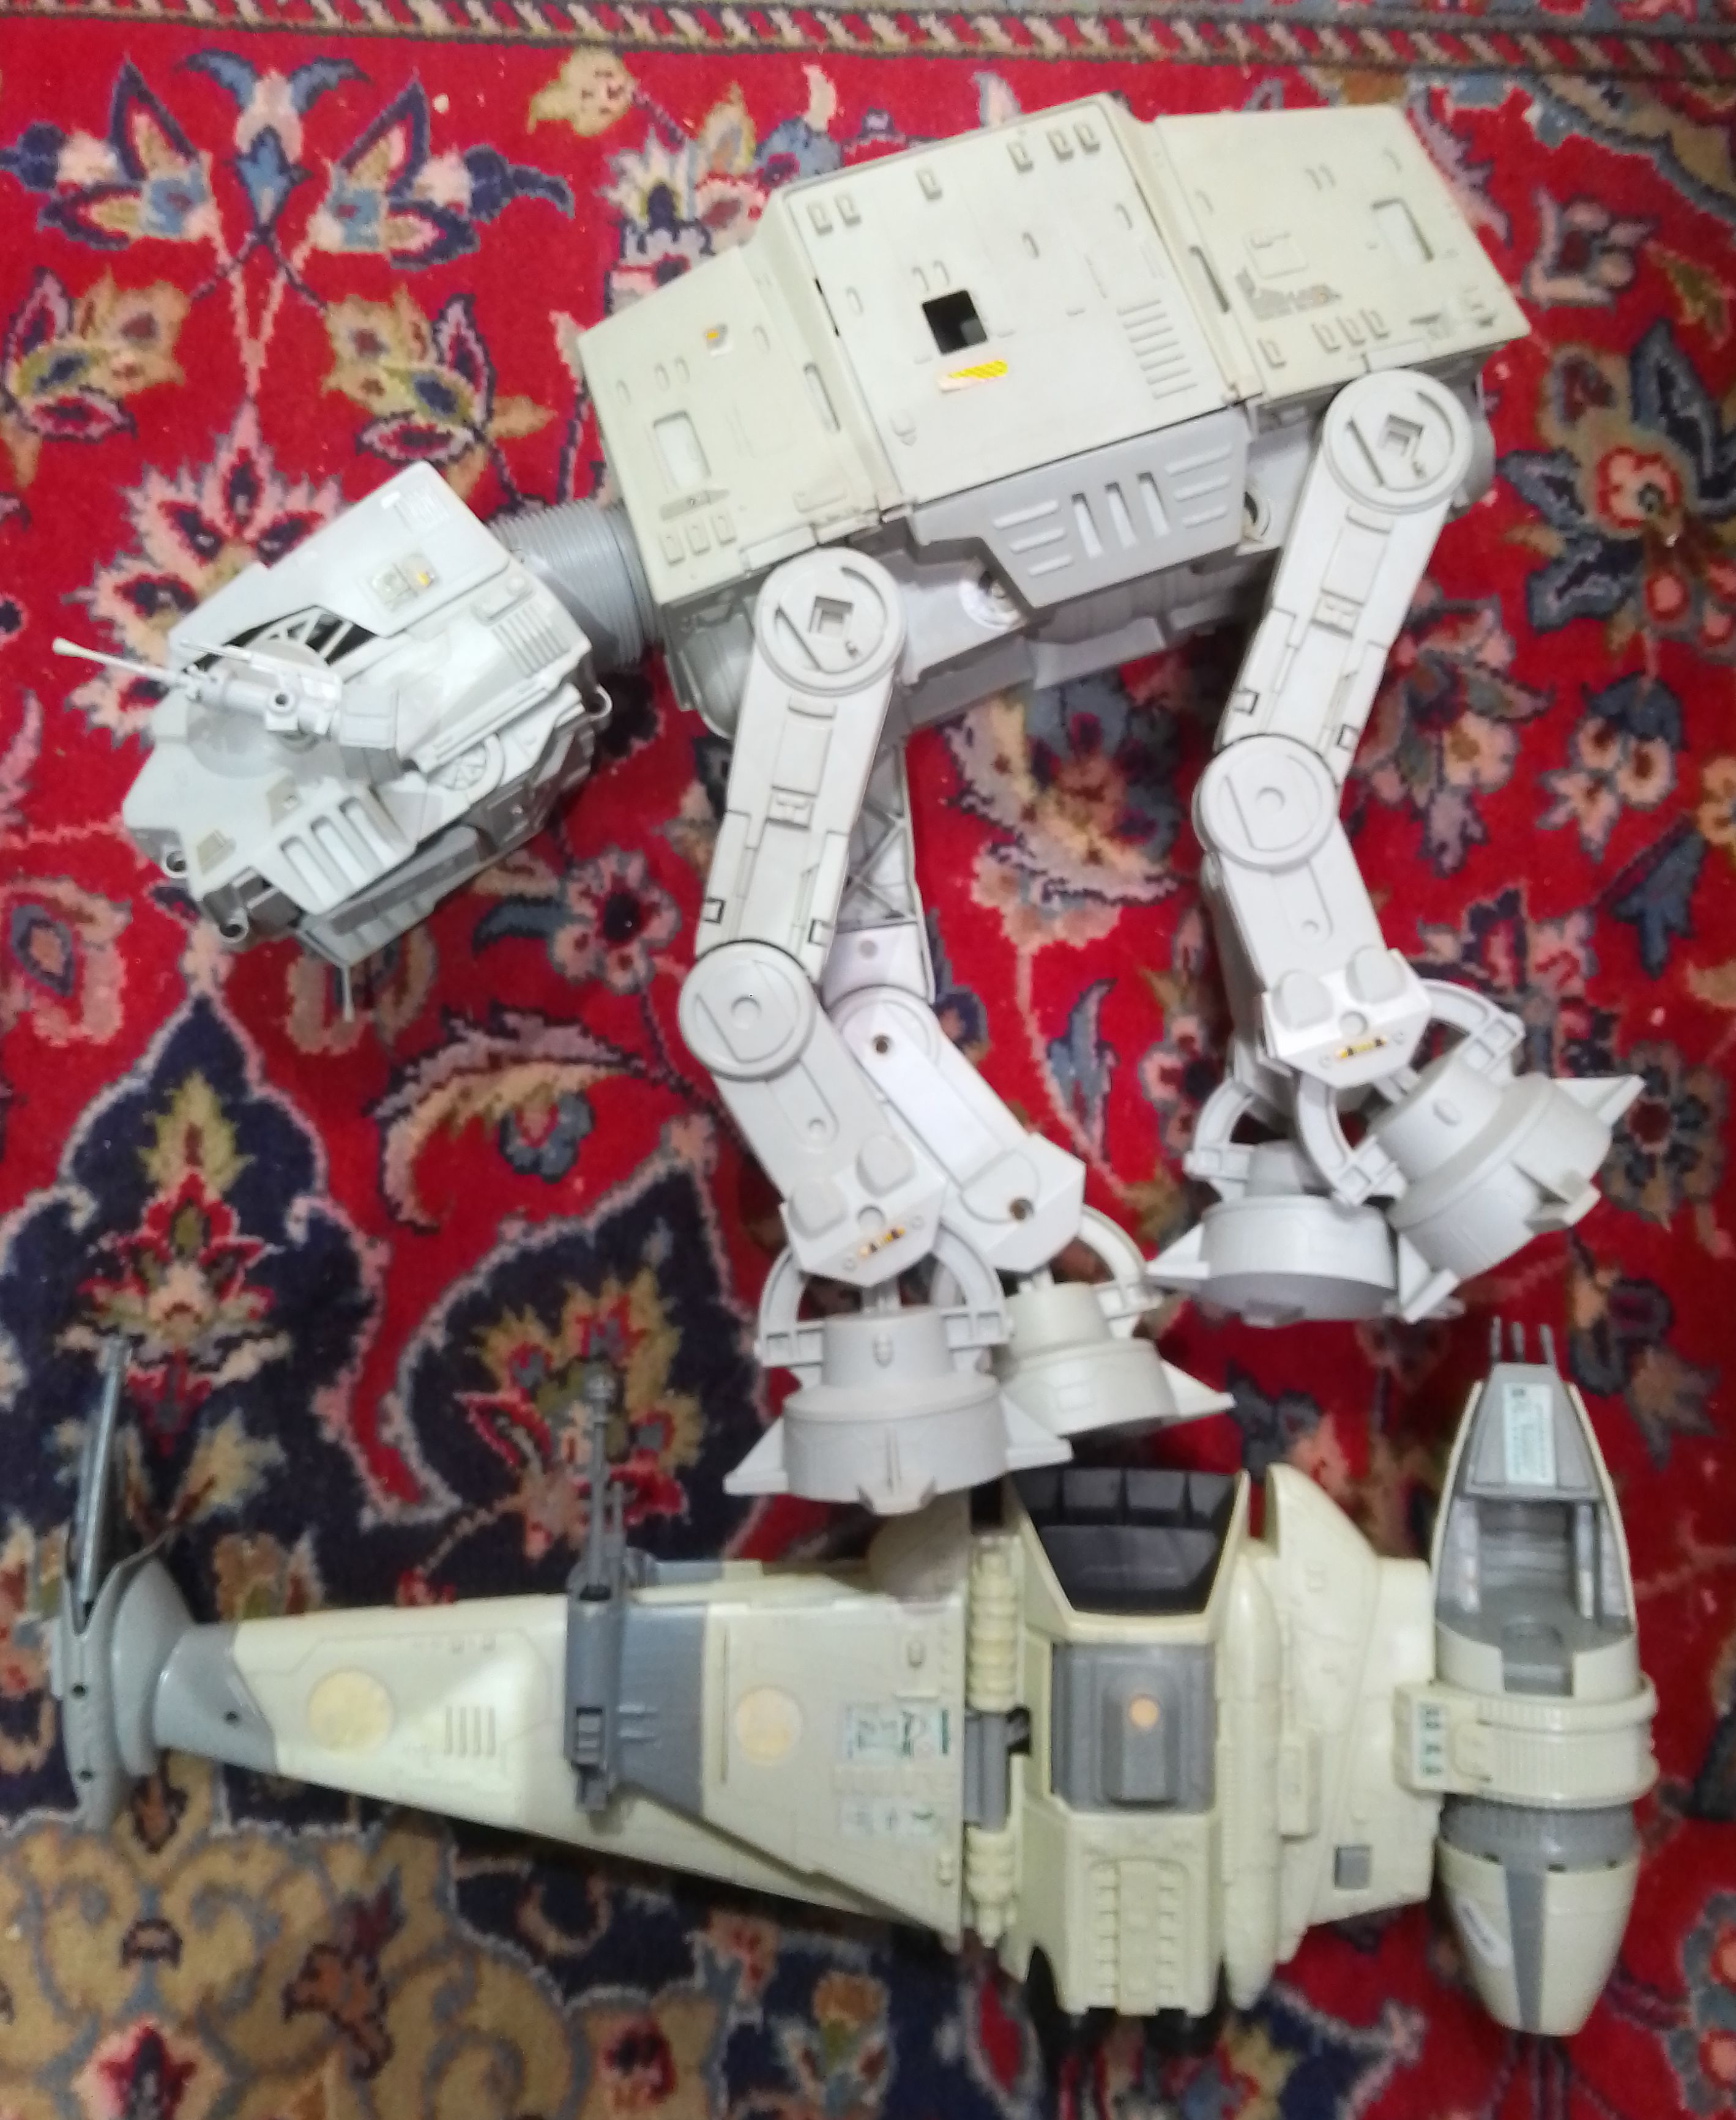 Two vintage Star Wars toys; an AT-AT and a B-Wing Fighter.